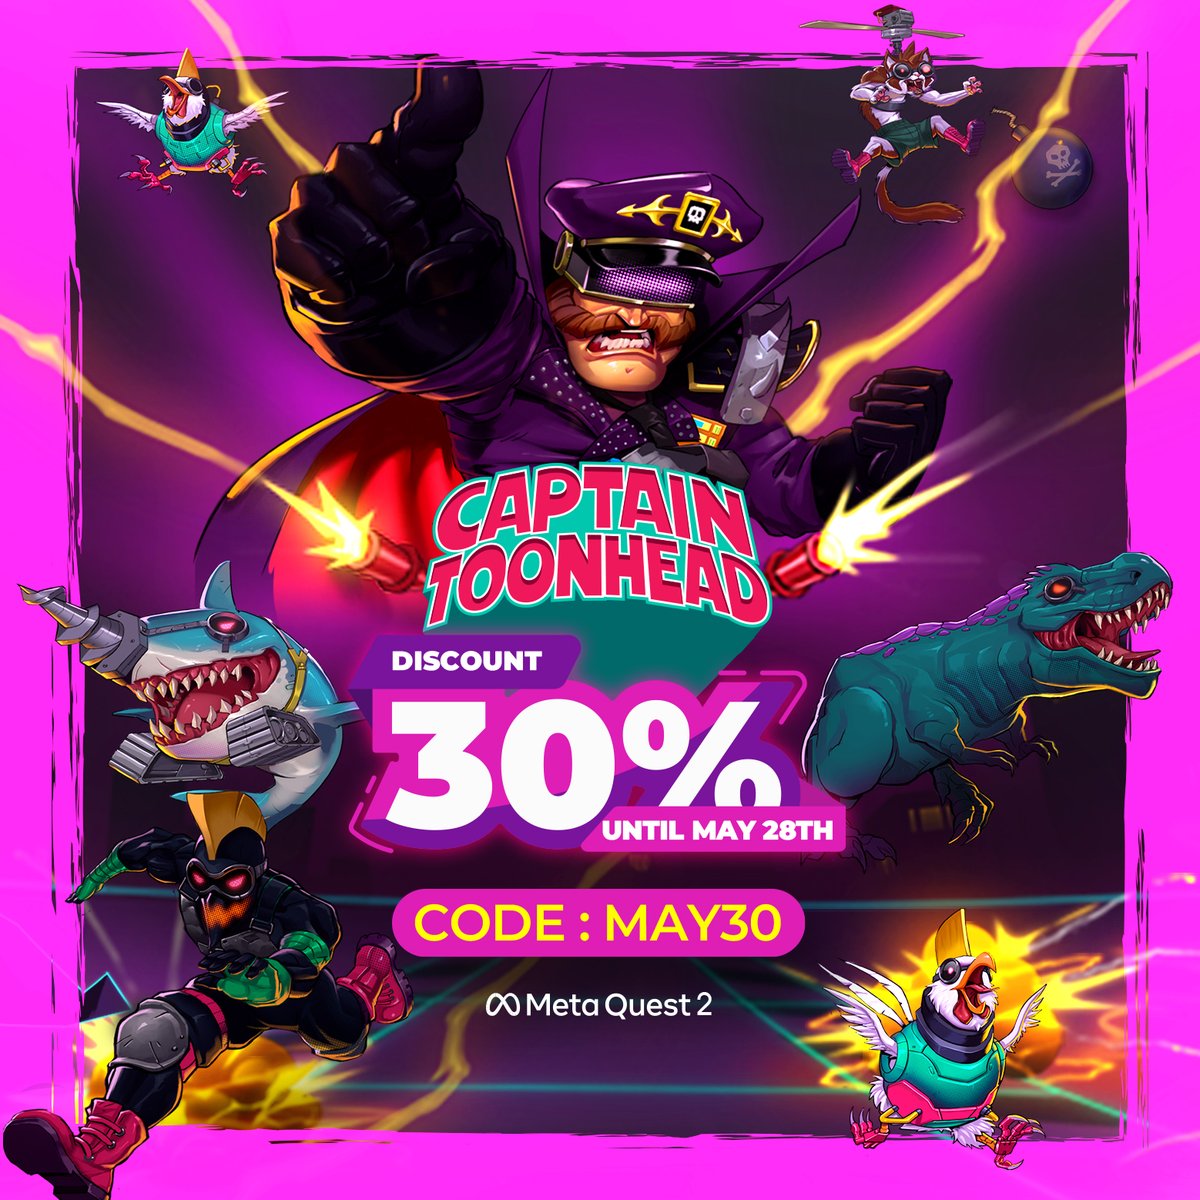 🚀 Save Earth with Captain ToonHead! From May 20th to 28th, enjoy an incredible 30% discount at the Meta Quest Store for VR using the code 'MAY30' Don't miss out!